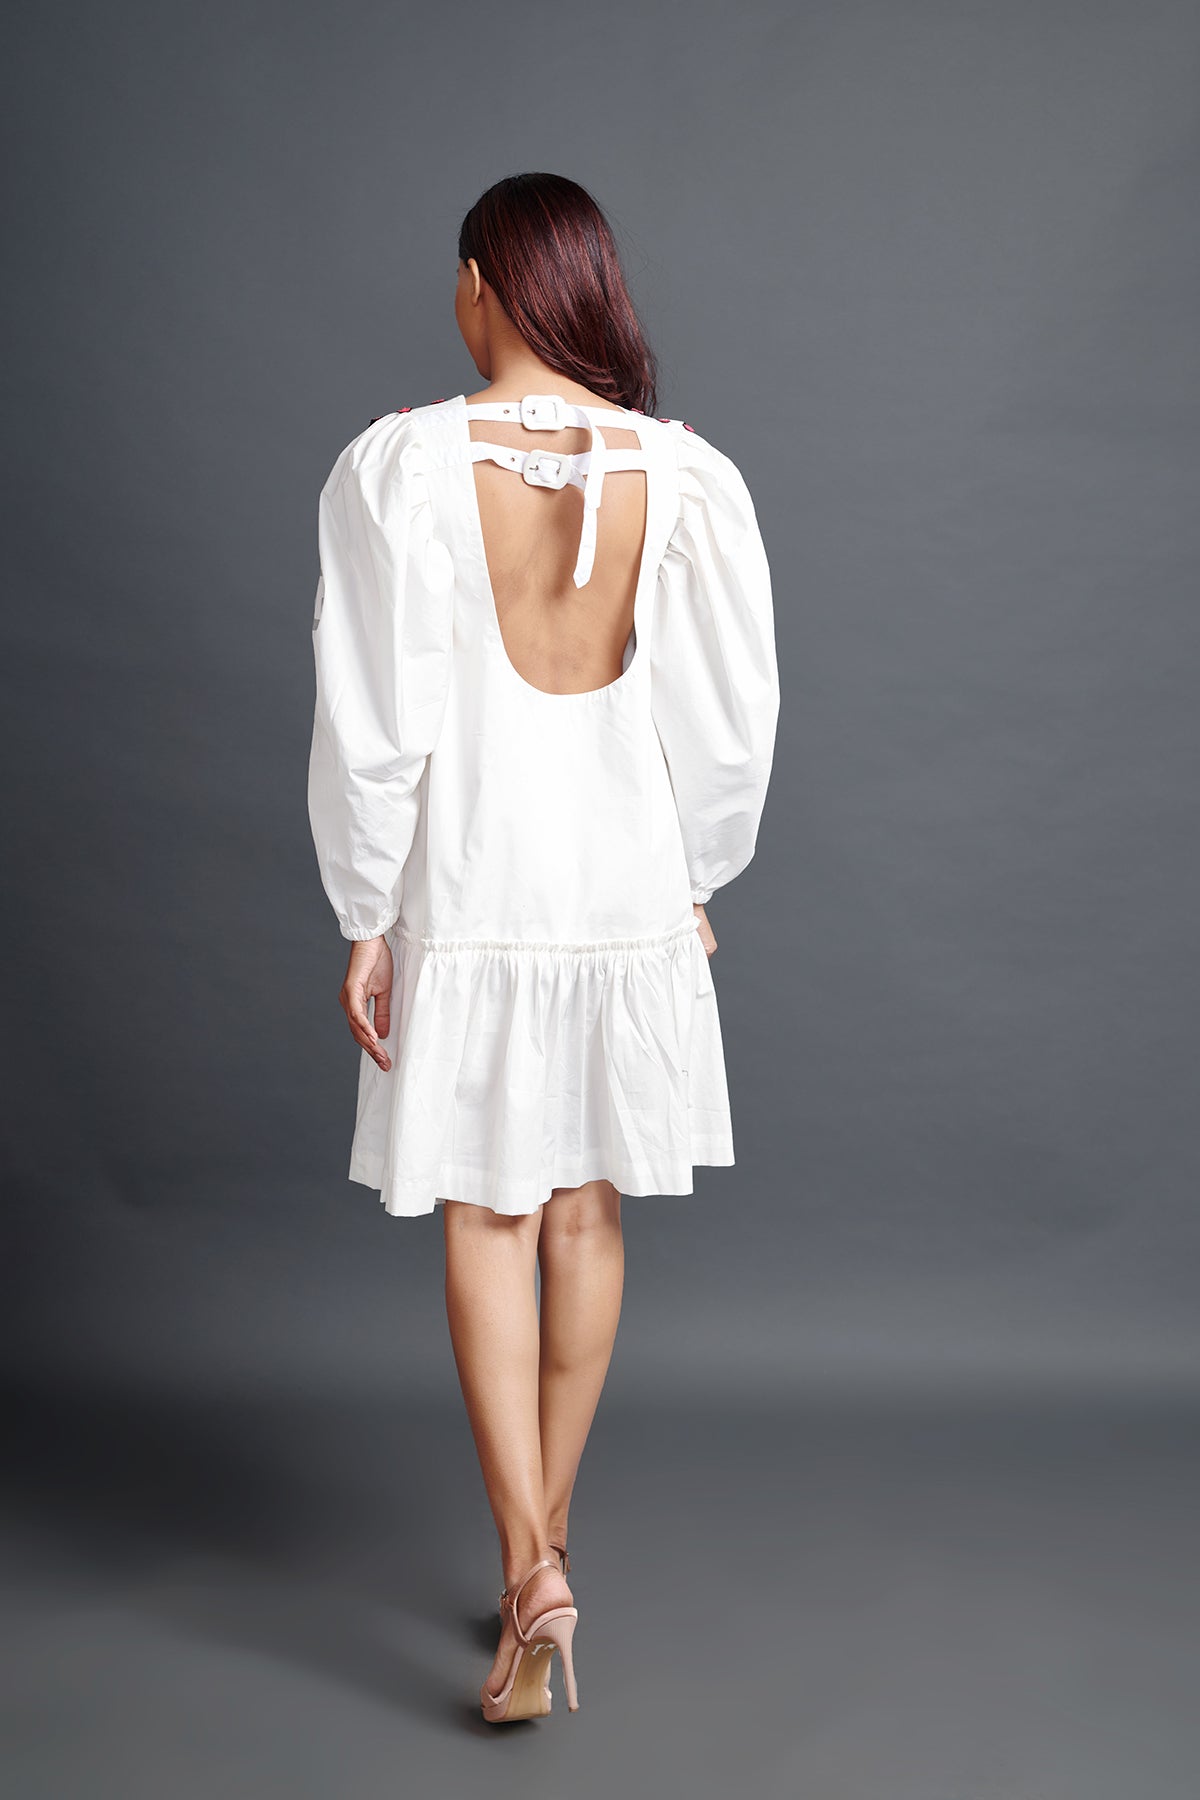 Image of WHITE GATHERED BACKLESS DRESS IN COTTON BASE WITH CUTWORK EMBROIDERY. From savoirfashions.com